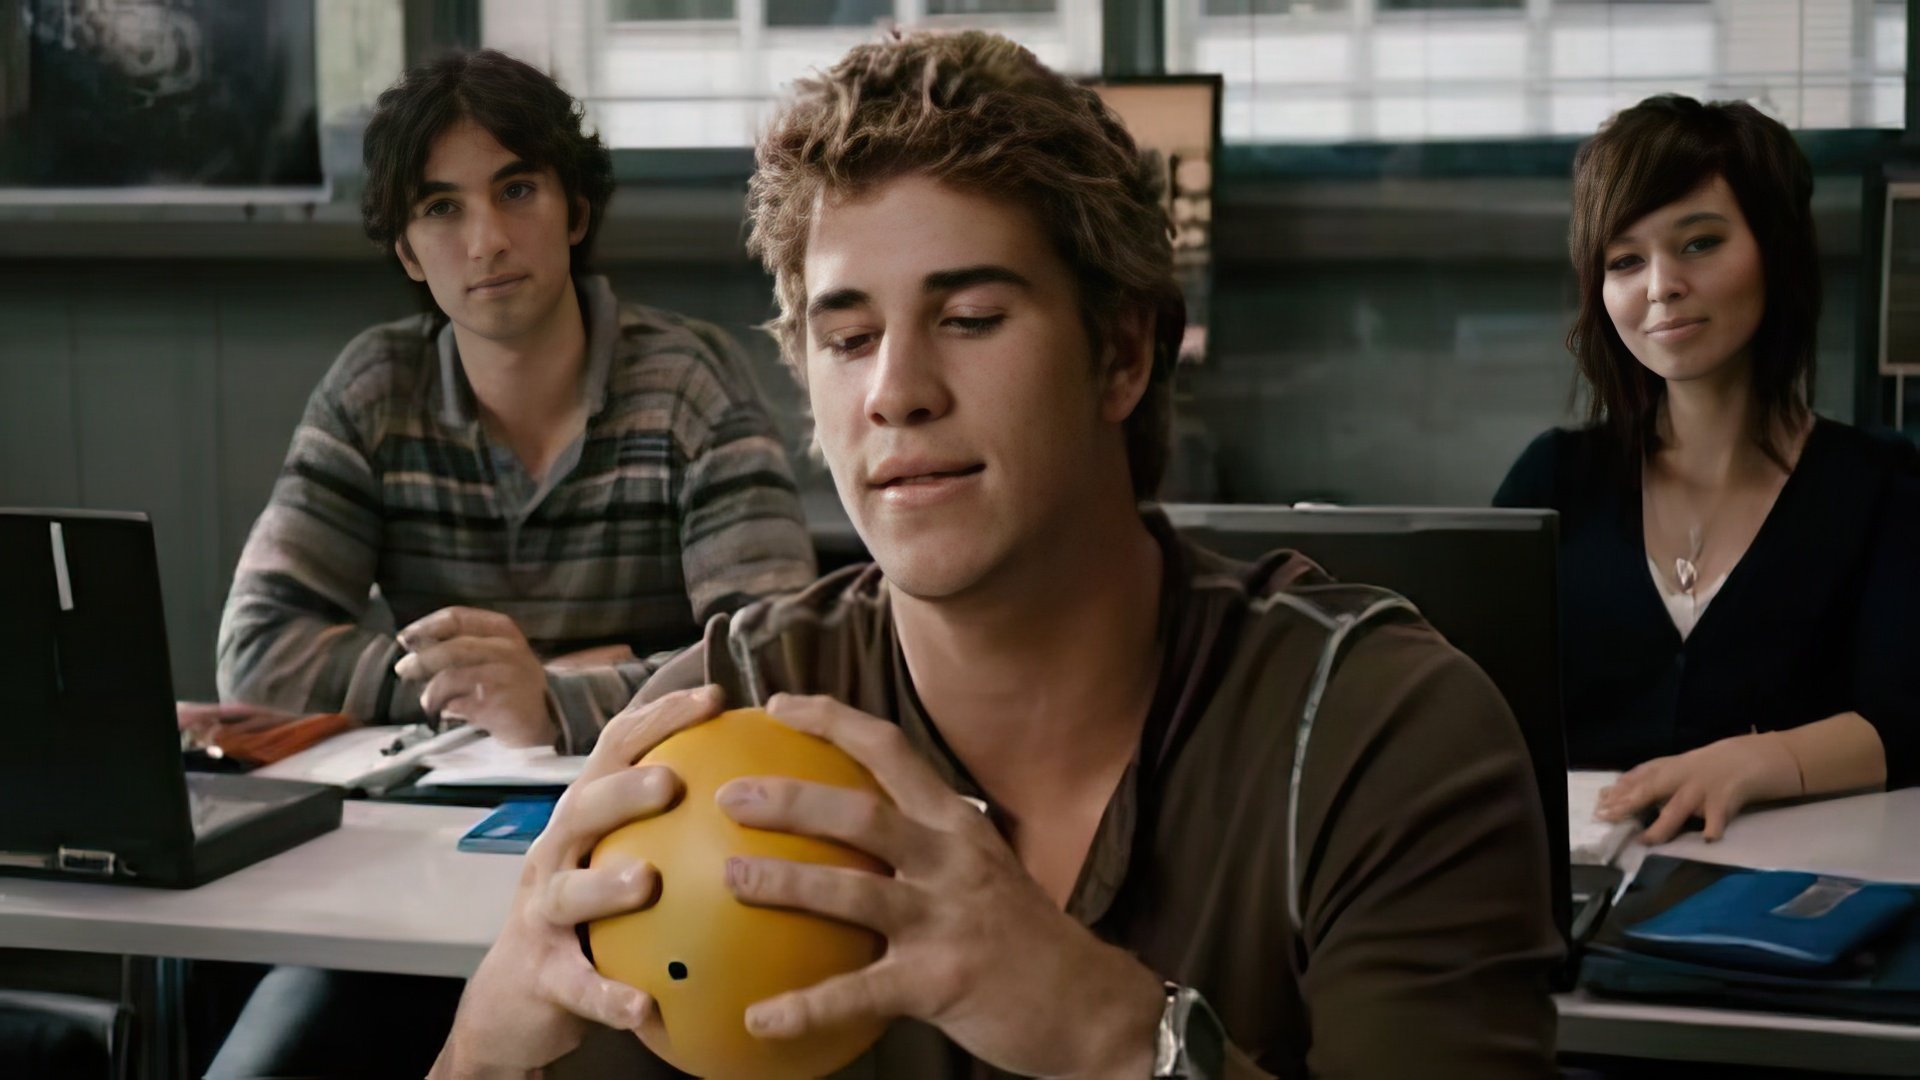 'Knowing' - the first feature film with Liam Hemsworth